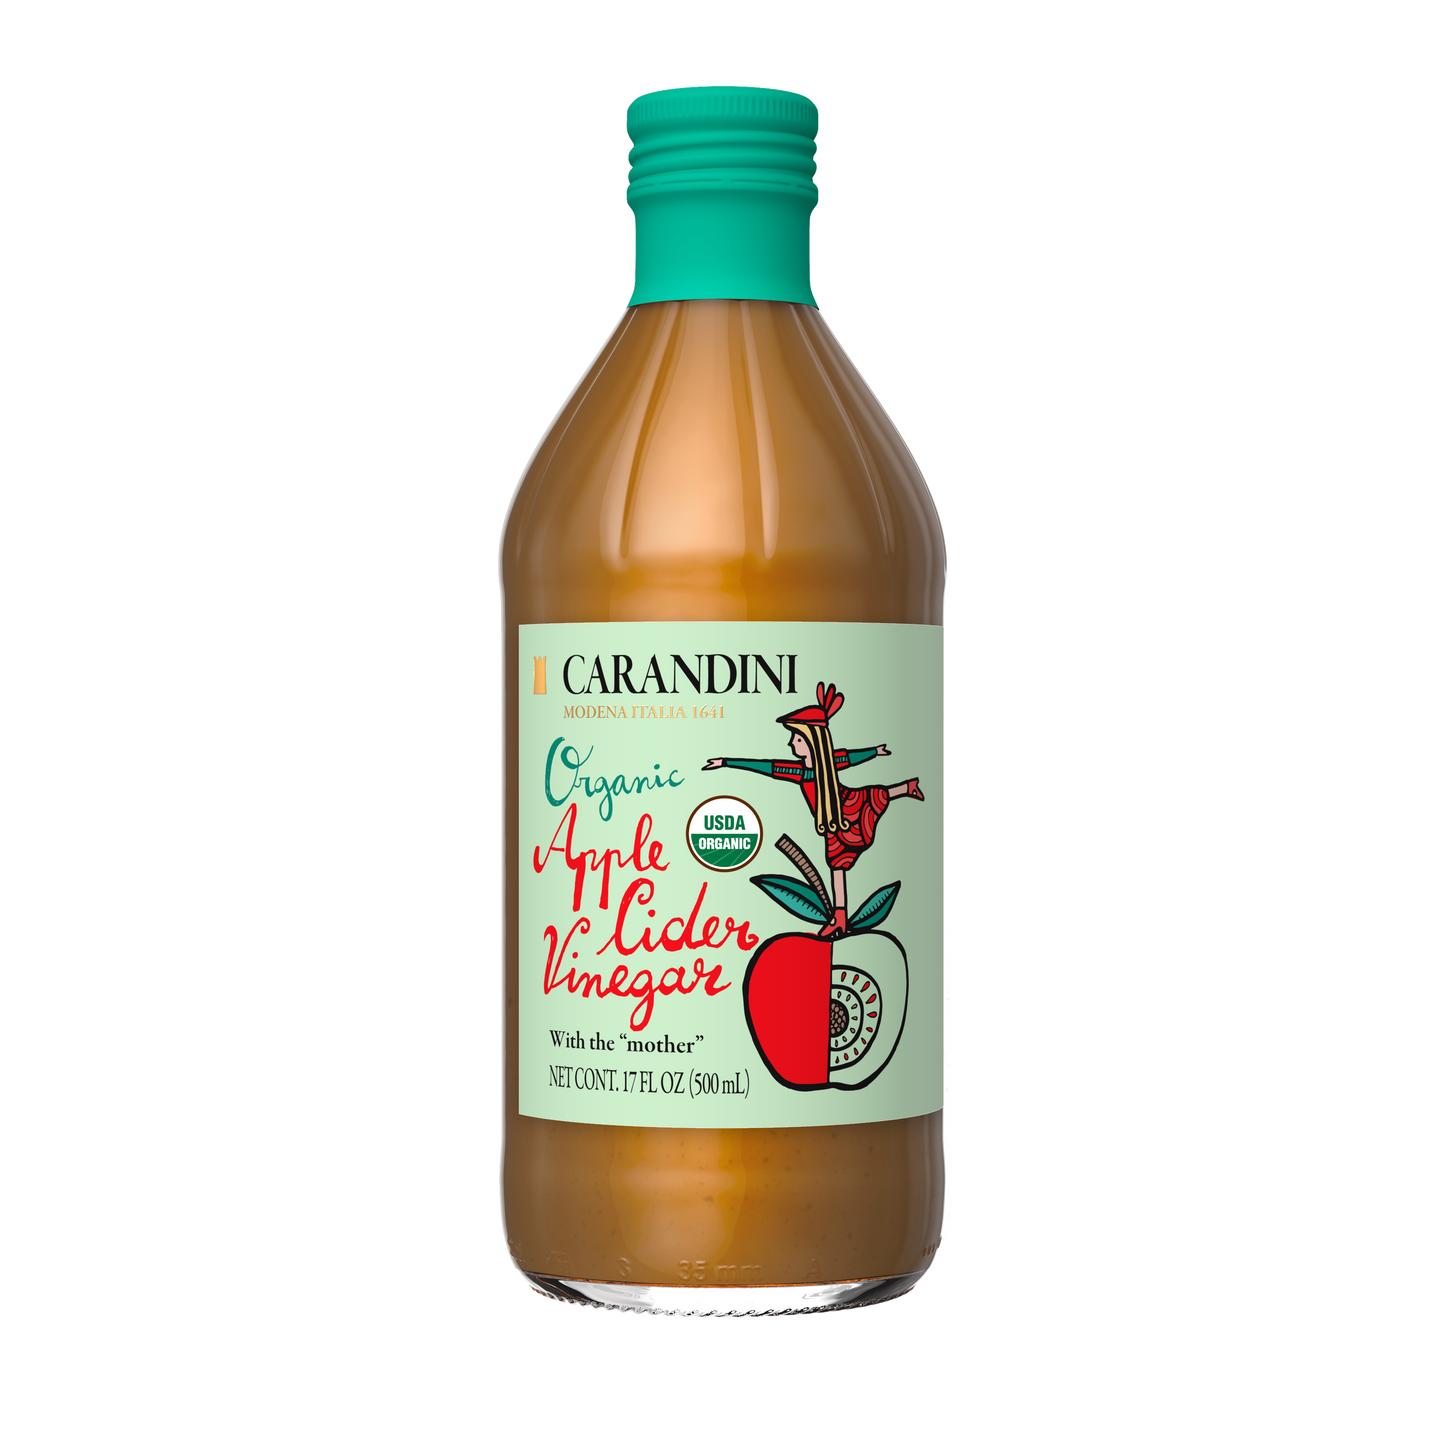 Organic Apple Cider Vinegar with "the mother"